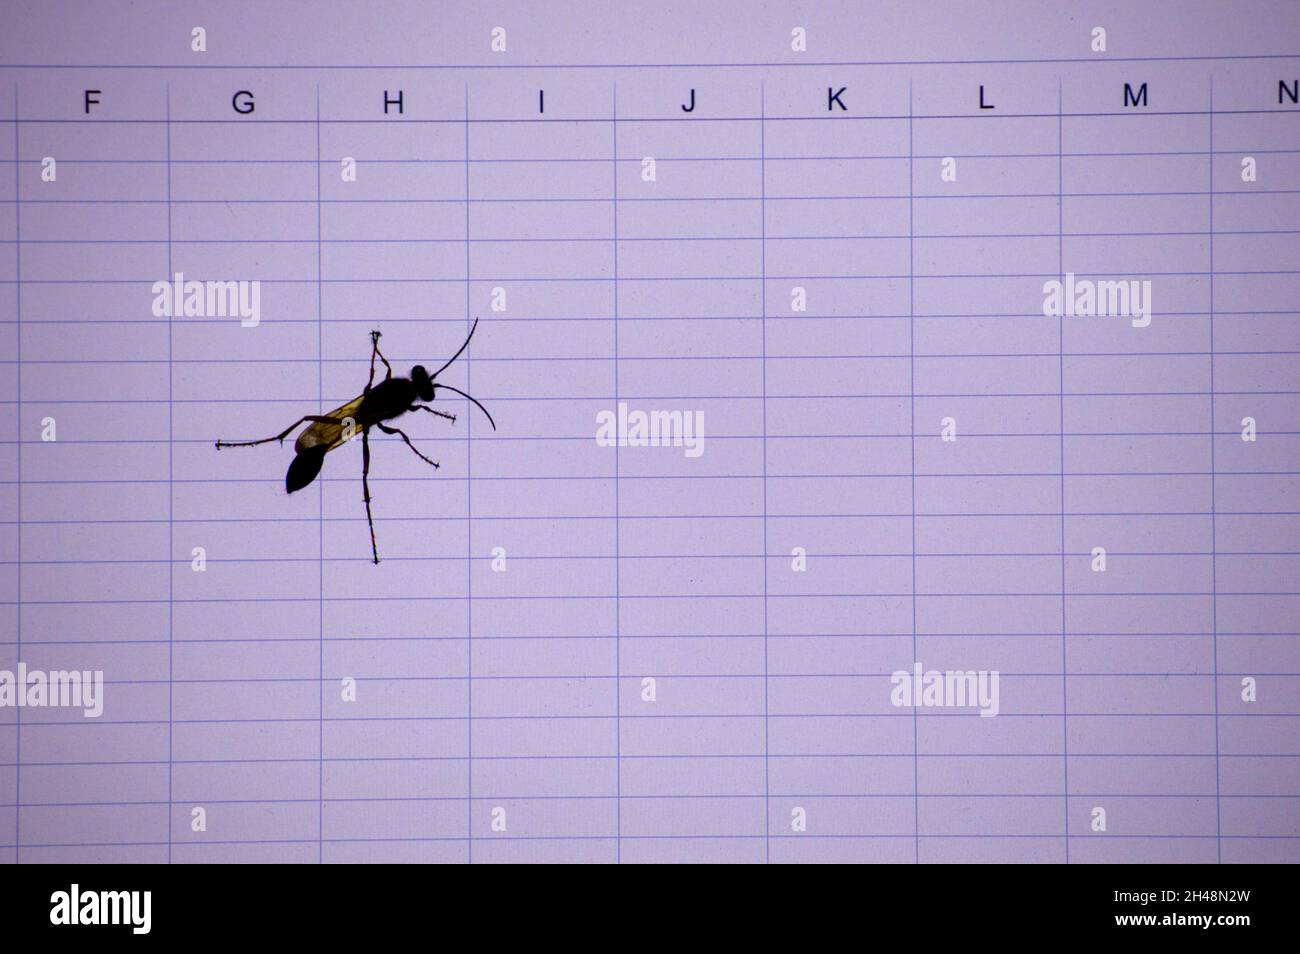 A bug computer definition is referred to as a failure or a flaw in the software program. A Bug is produces an incorrect or undesired result Stock Photo